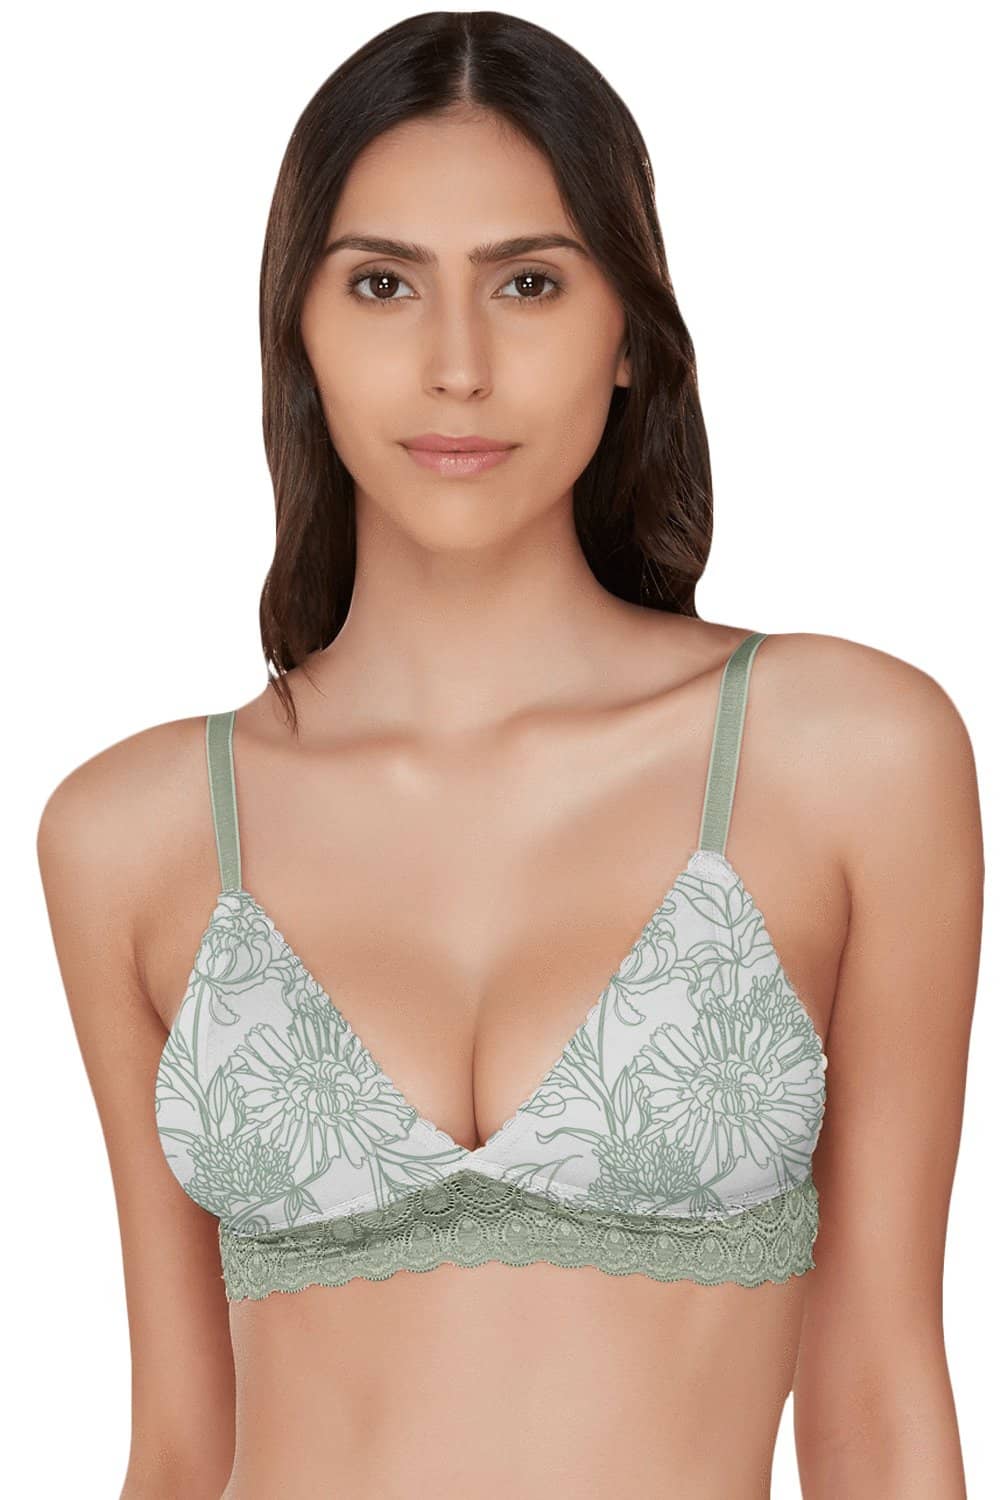 Organic Cotton  Antimicrobial Non-wired Triangular Lace Band Bralette-ISB095-Green Print-